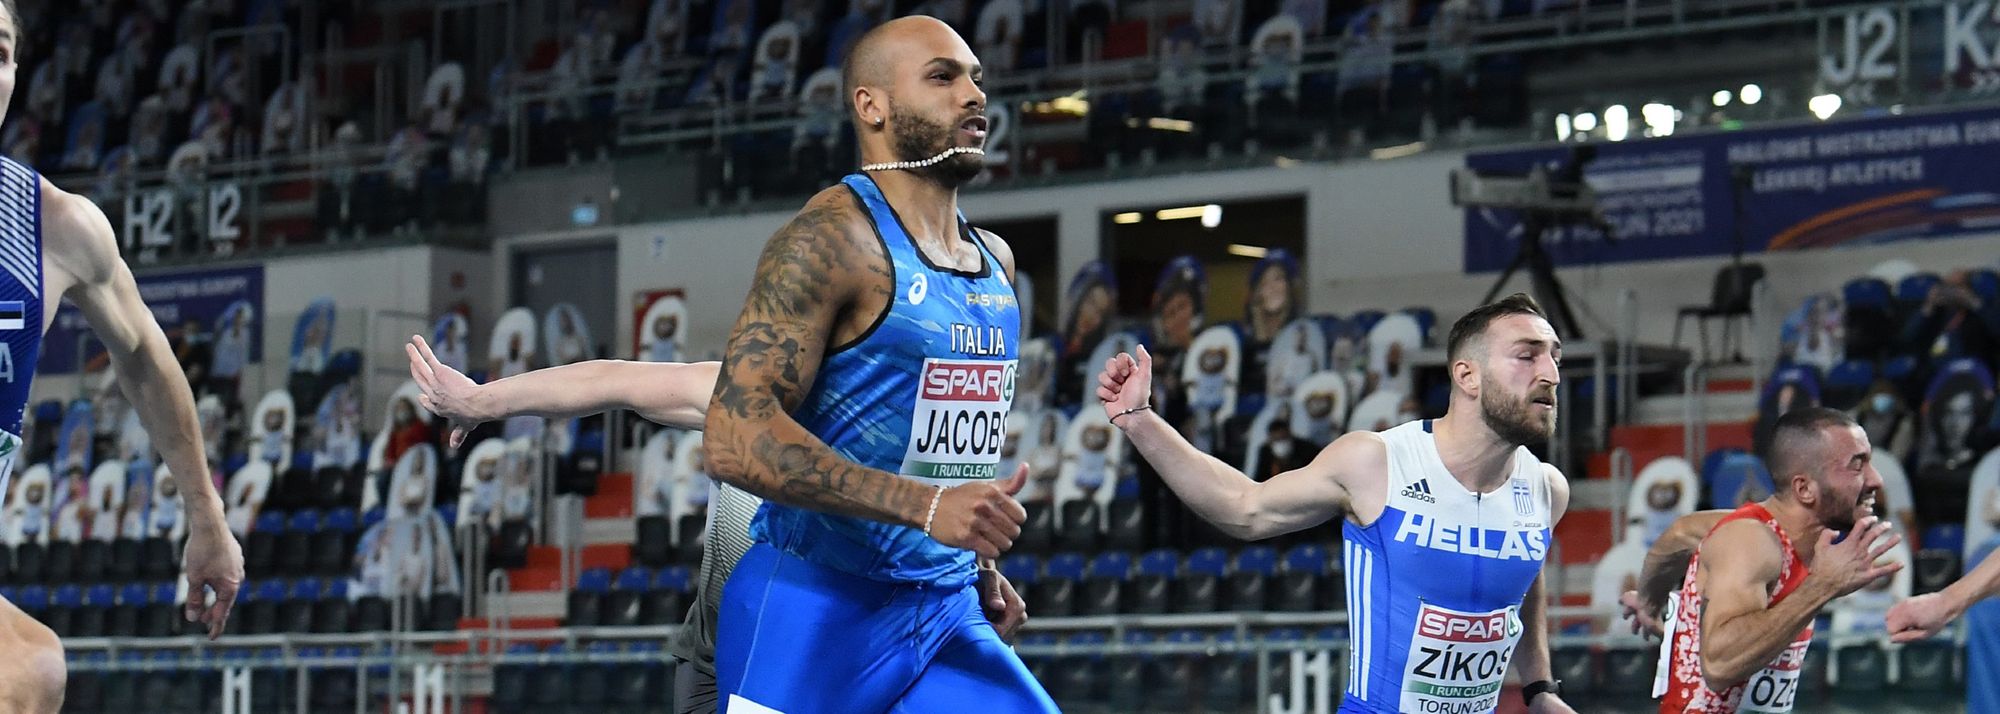 A look at the contenders in the men's 60m at the World Athletics Indoor Championships Belgrade 22.